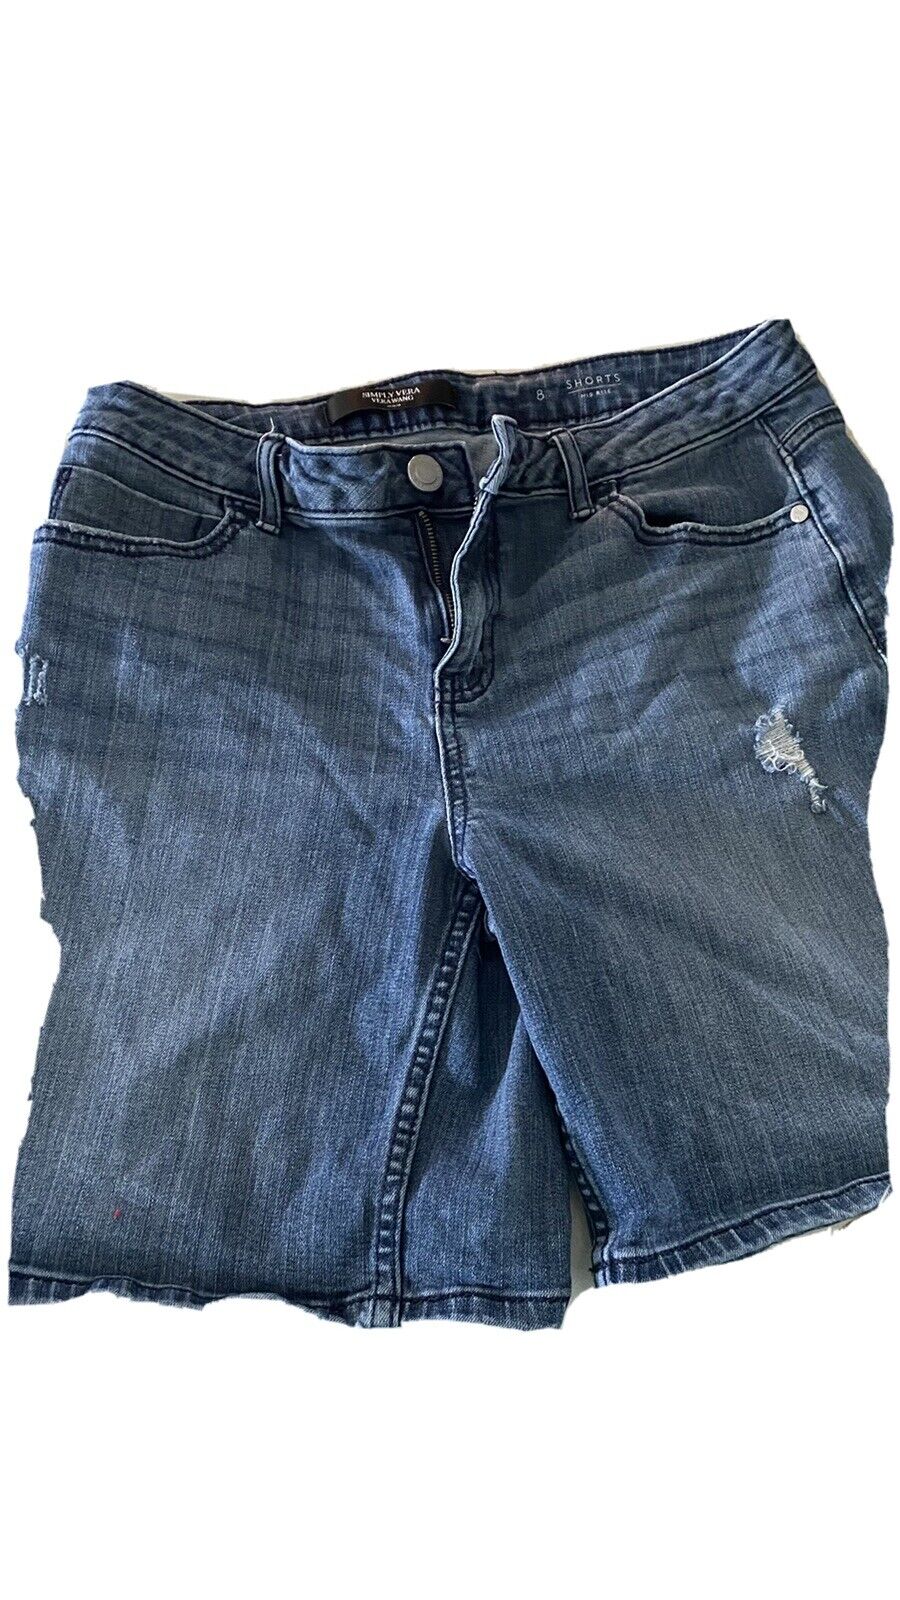 Women's Simply Vera Our Beauty products shop most popular Wang Jean Blue Denim Roll 8 Shorts sz Rise Mid Cuff